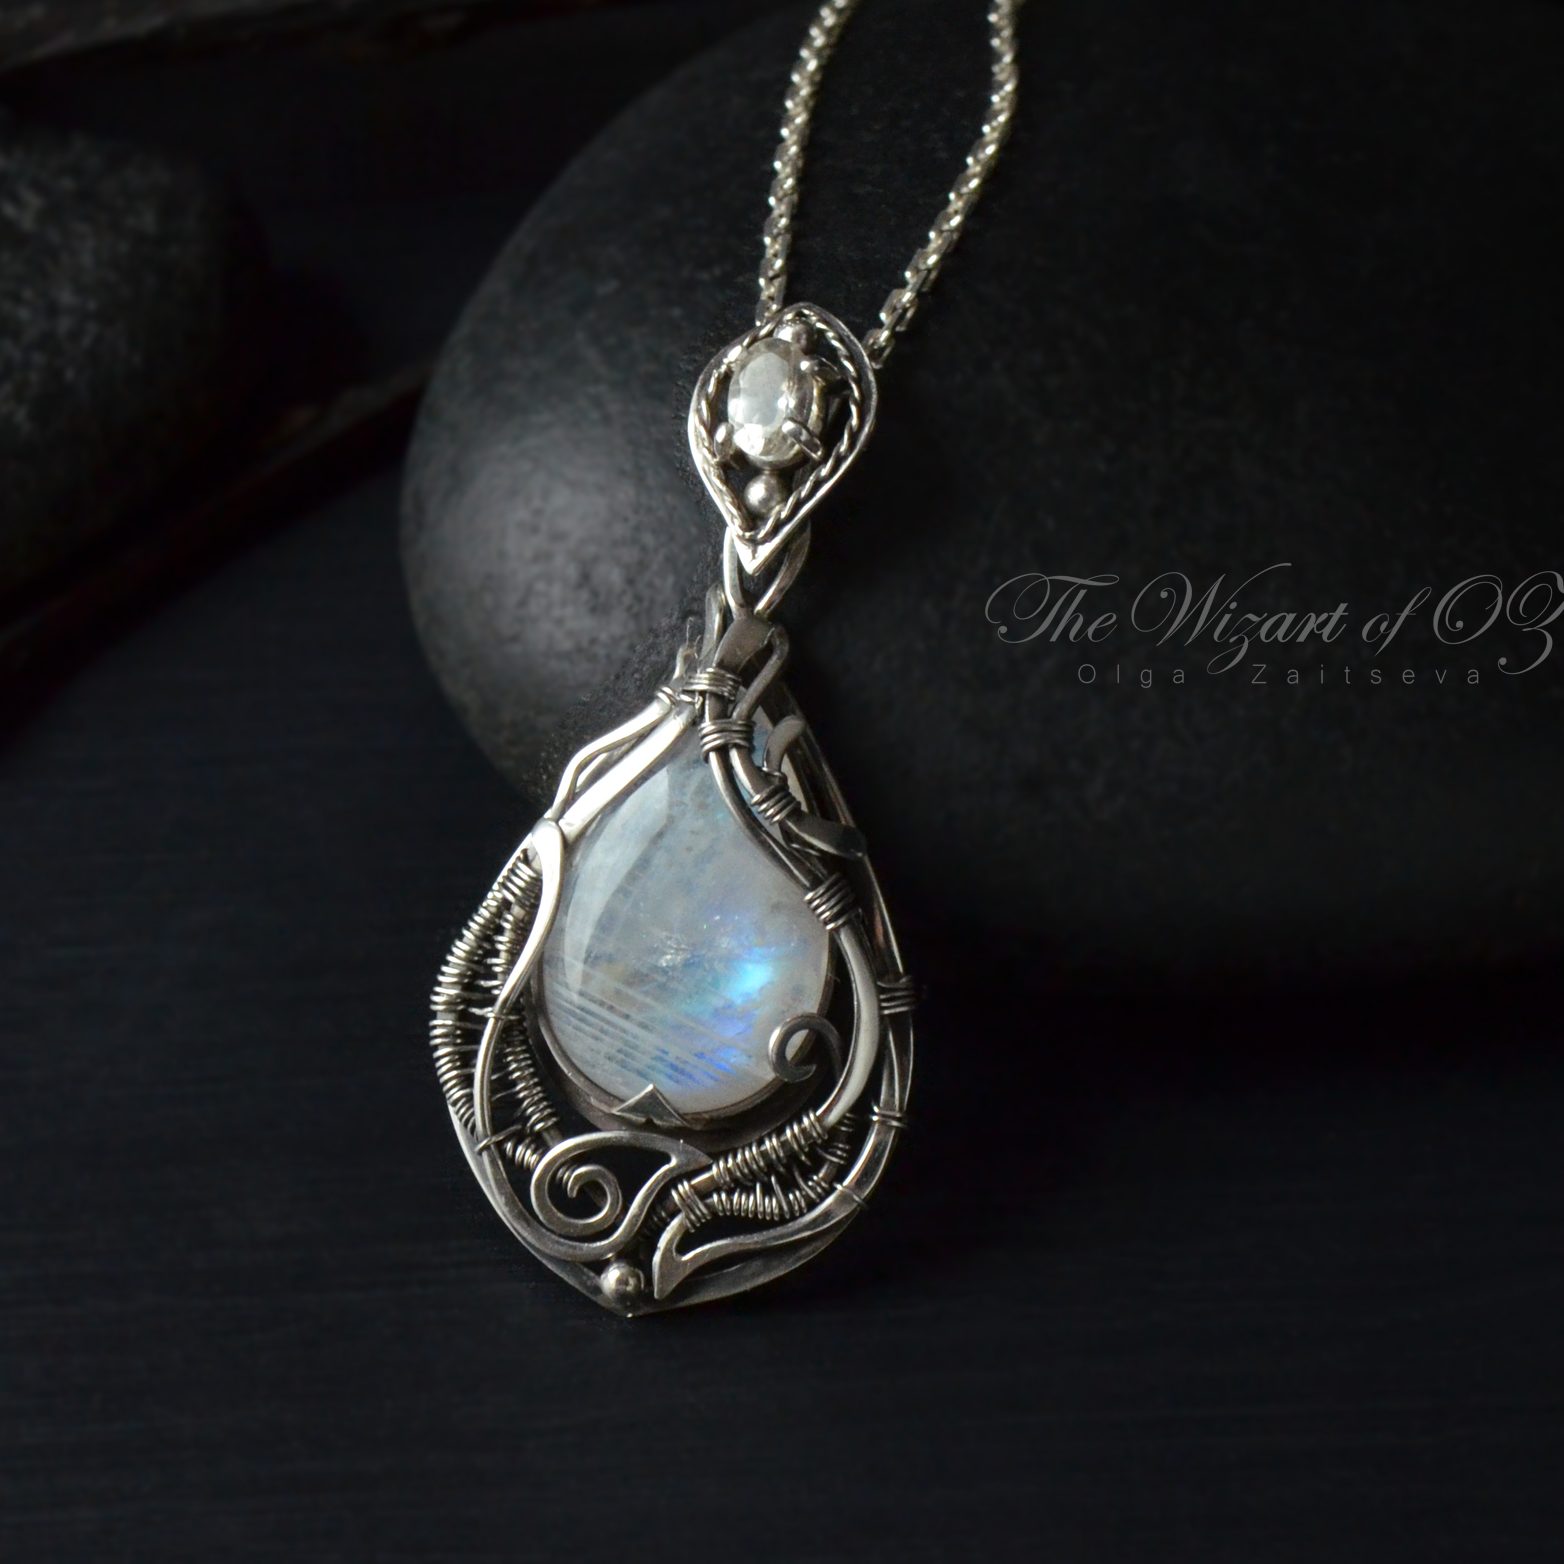 Fantasy moonstone necklace in 925 sterling silver Romantic gift